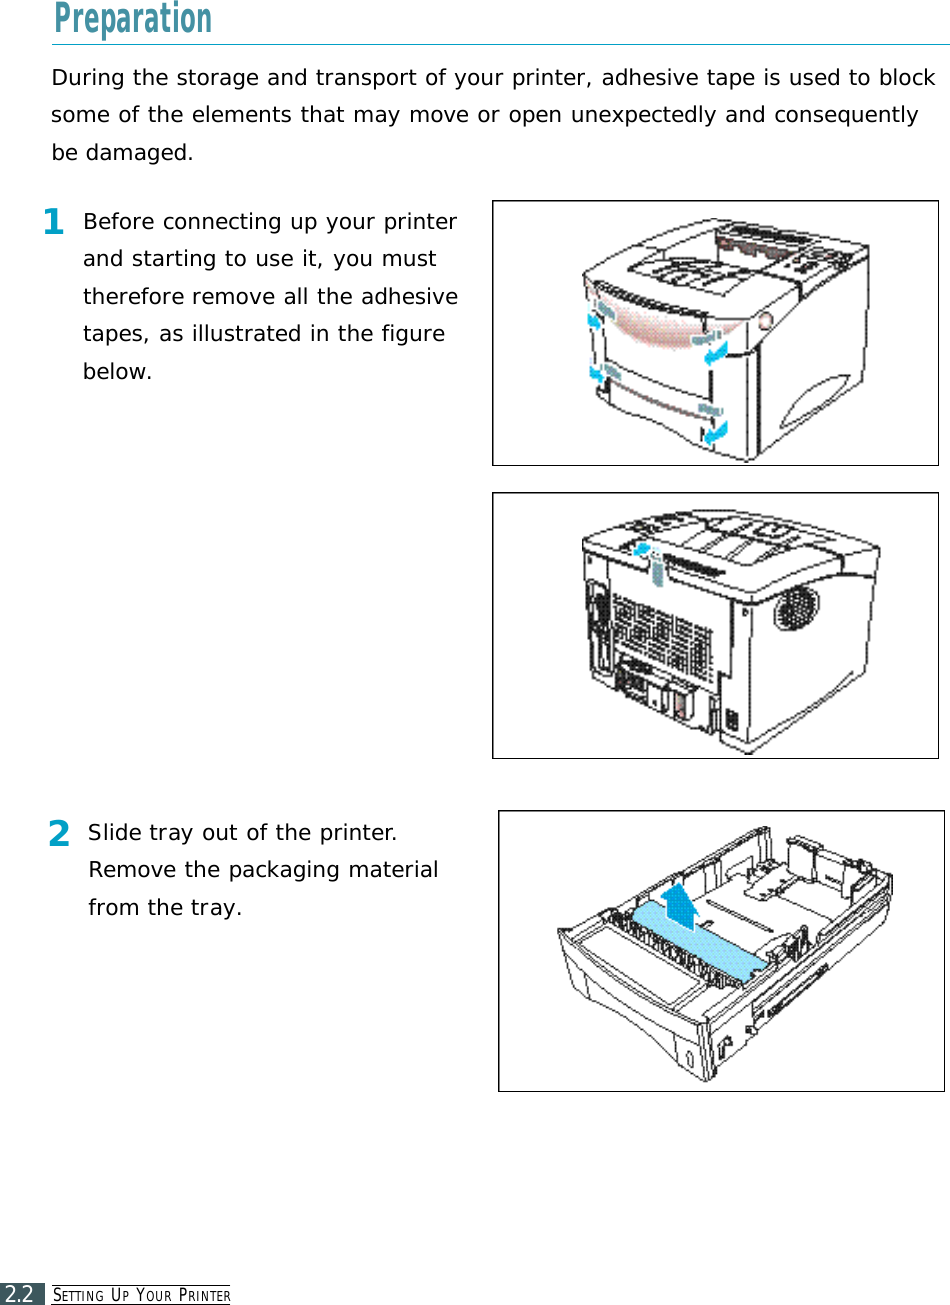 SE T T I N G UPYO U R PR I N T E R2.2During the storage and transport of your printer, adhesive tape is used to blocksome of the elements that may move or open unexpectedly and consequentlybe damaged.1Before connecting up your printerand starting to use it, you musttherefore remove all the adhesivetapes, as illustrated in the figurebelow.2Slide tray out of the printer.Remove the packaging materialfrom the tray.Preparation